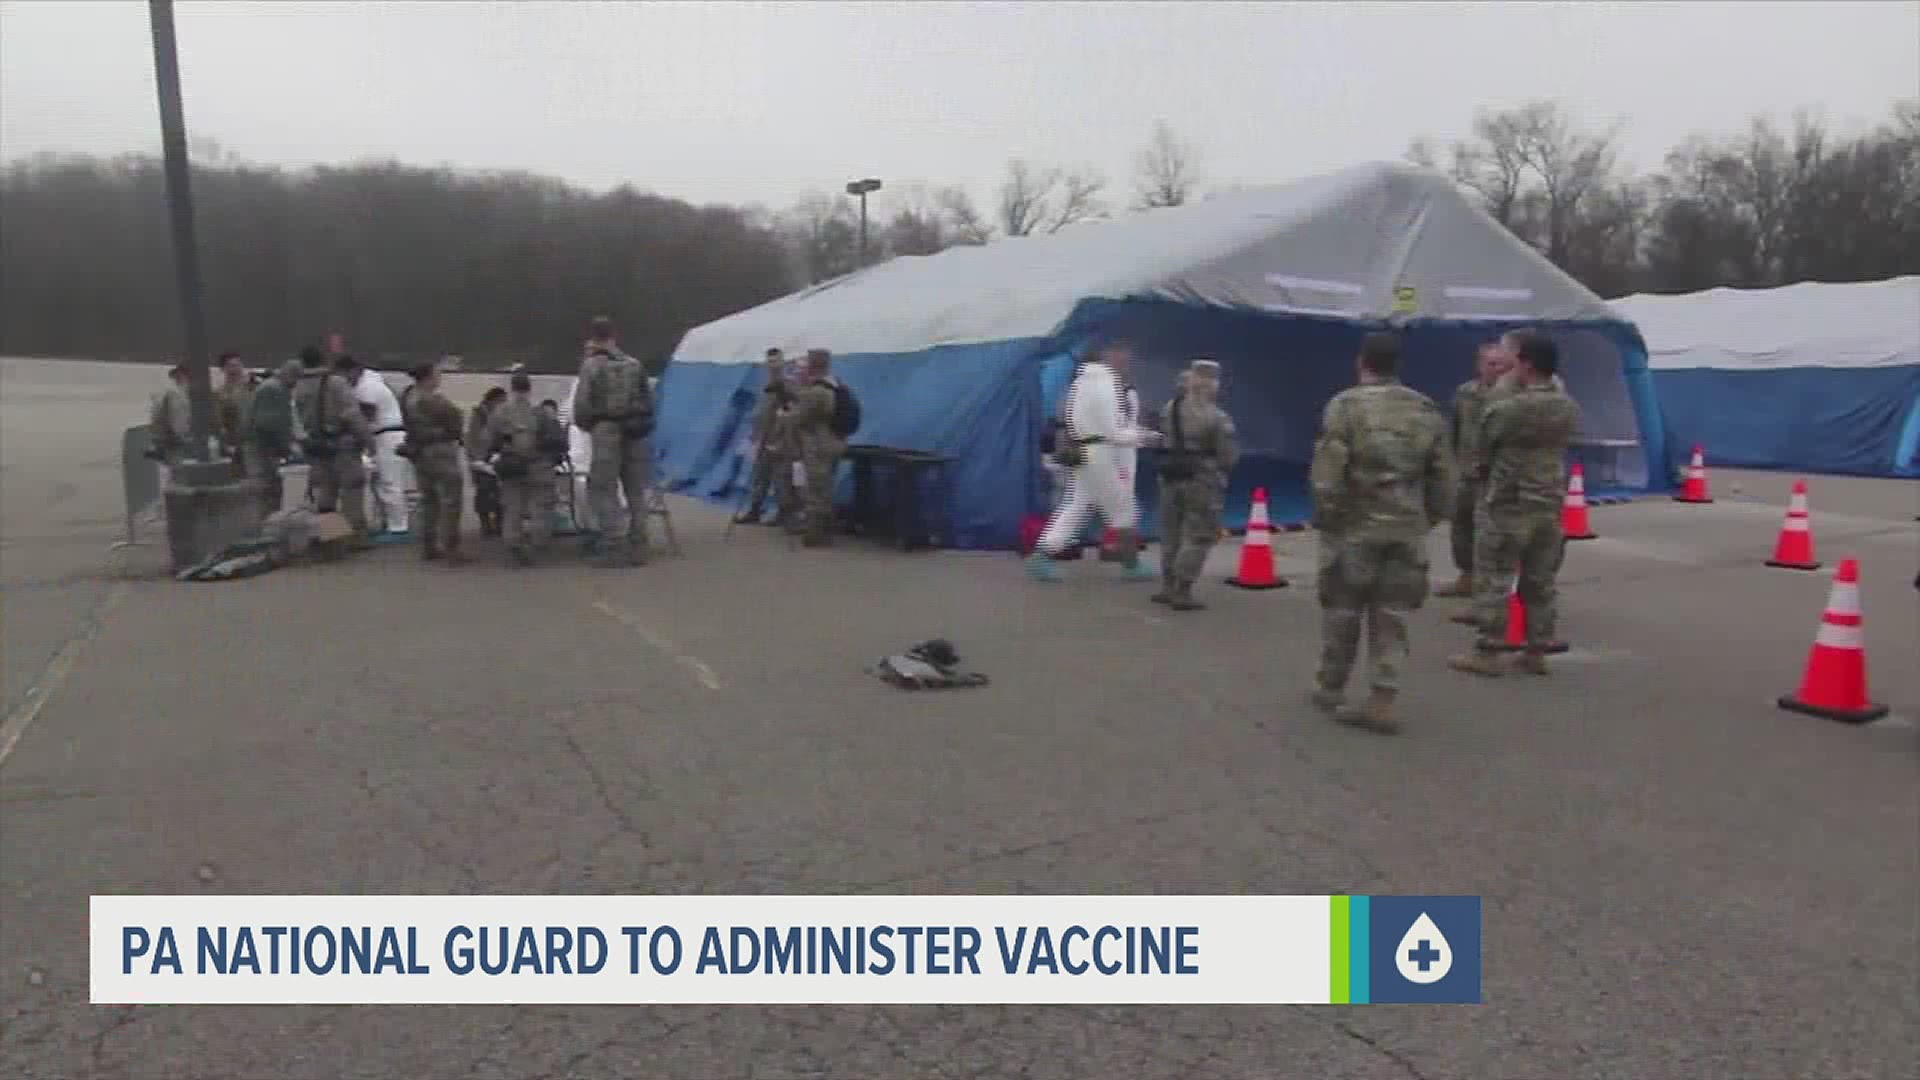 Guard members are serving clinical and nonclinical roles at the vaccination center, including as vaccinators, greeters and registrars, among others.